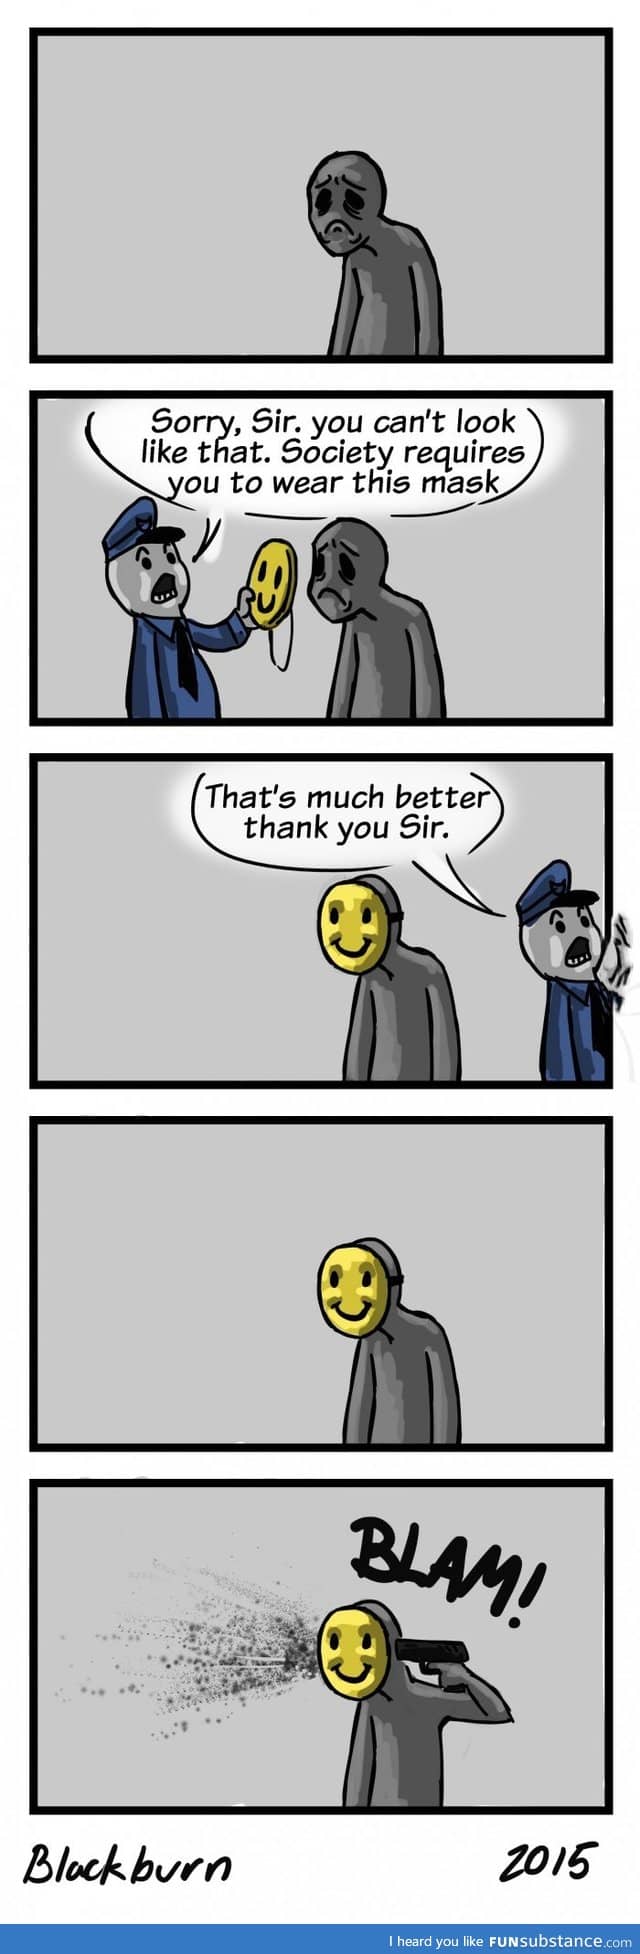 The happiness police